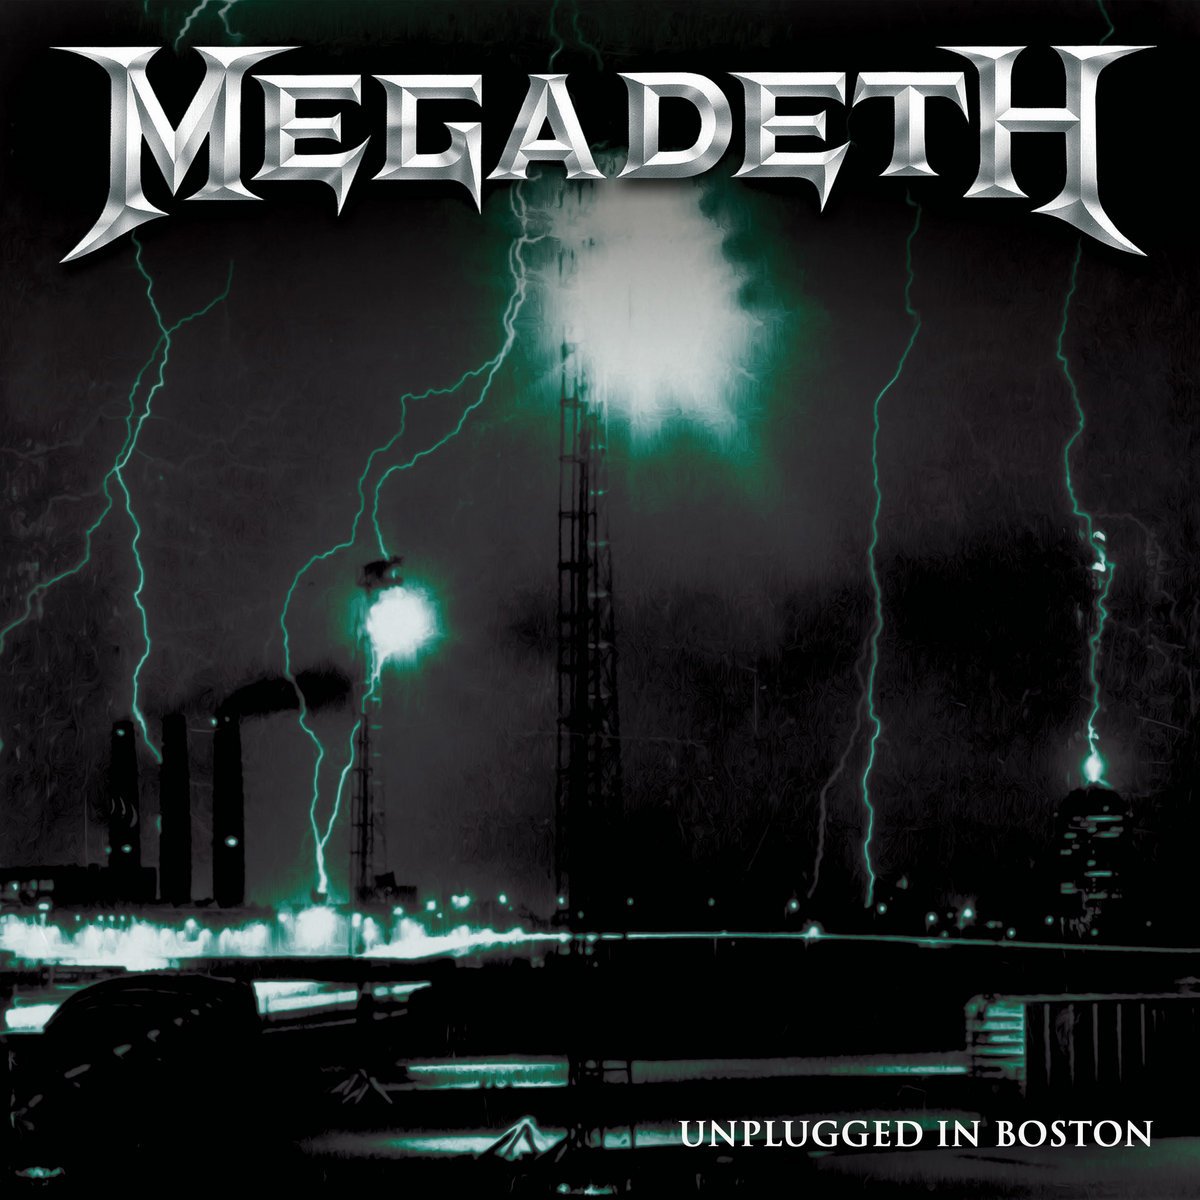 Megadeth-Unplugged In Boston-(CLO2461)-REISSUE-CD-FLAC-2021-WRE Download